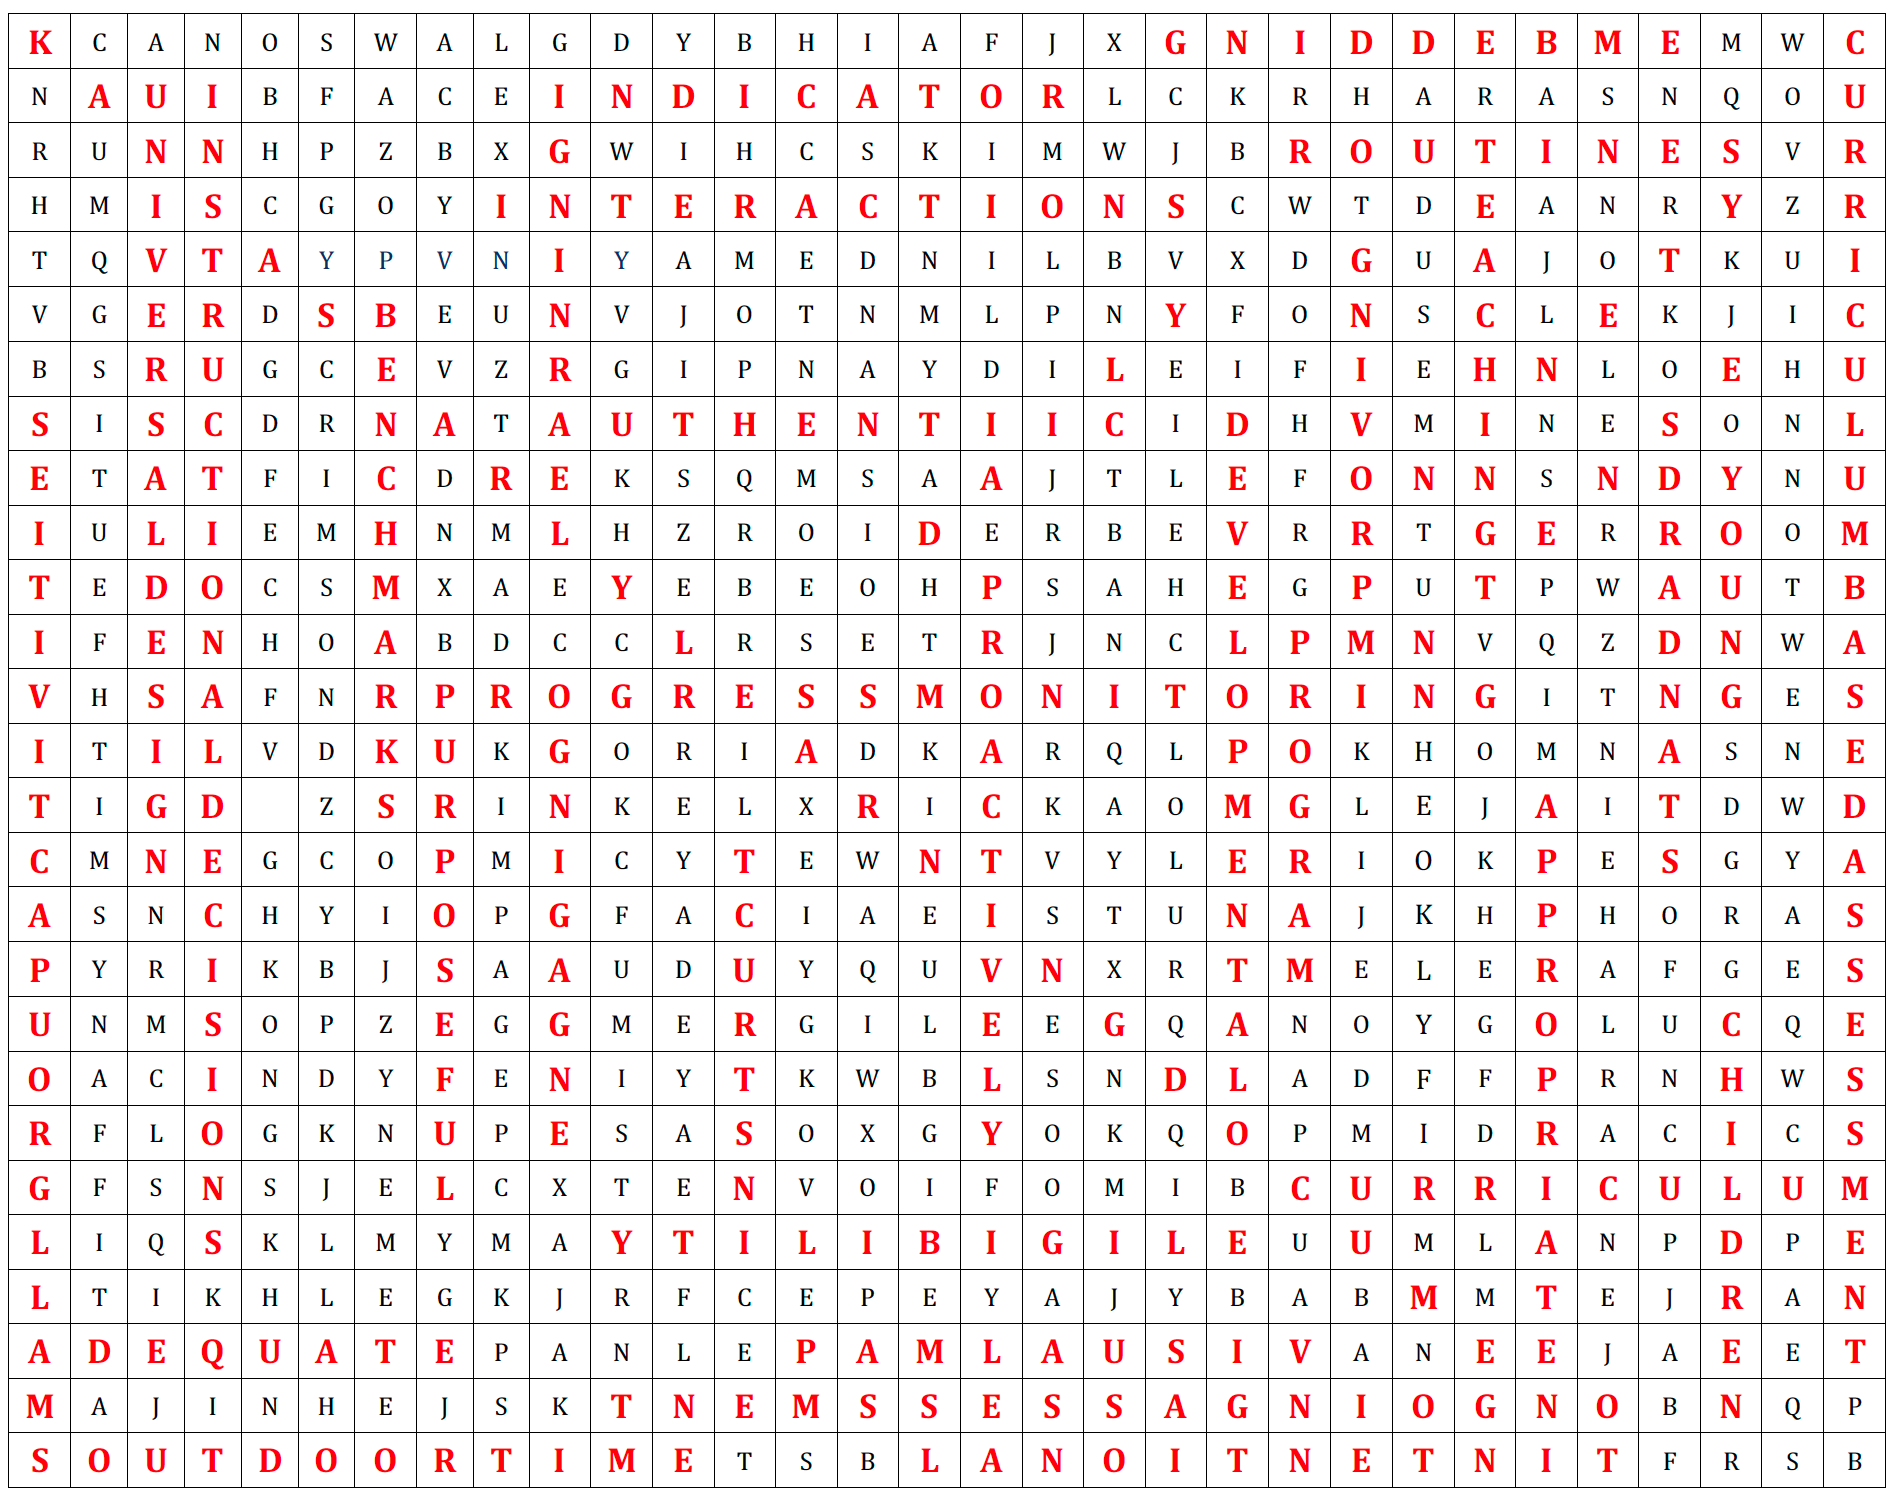 "Word Search Puzzle Answer Key"